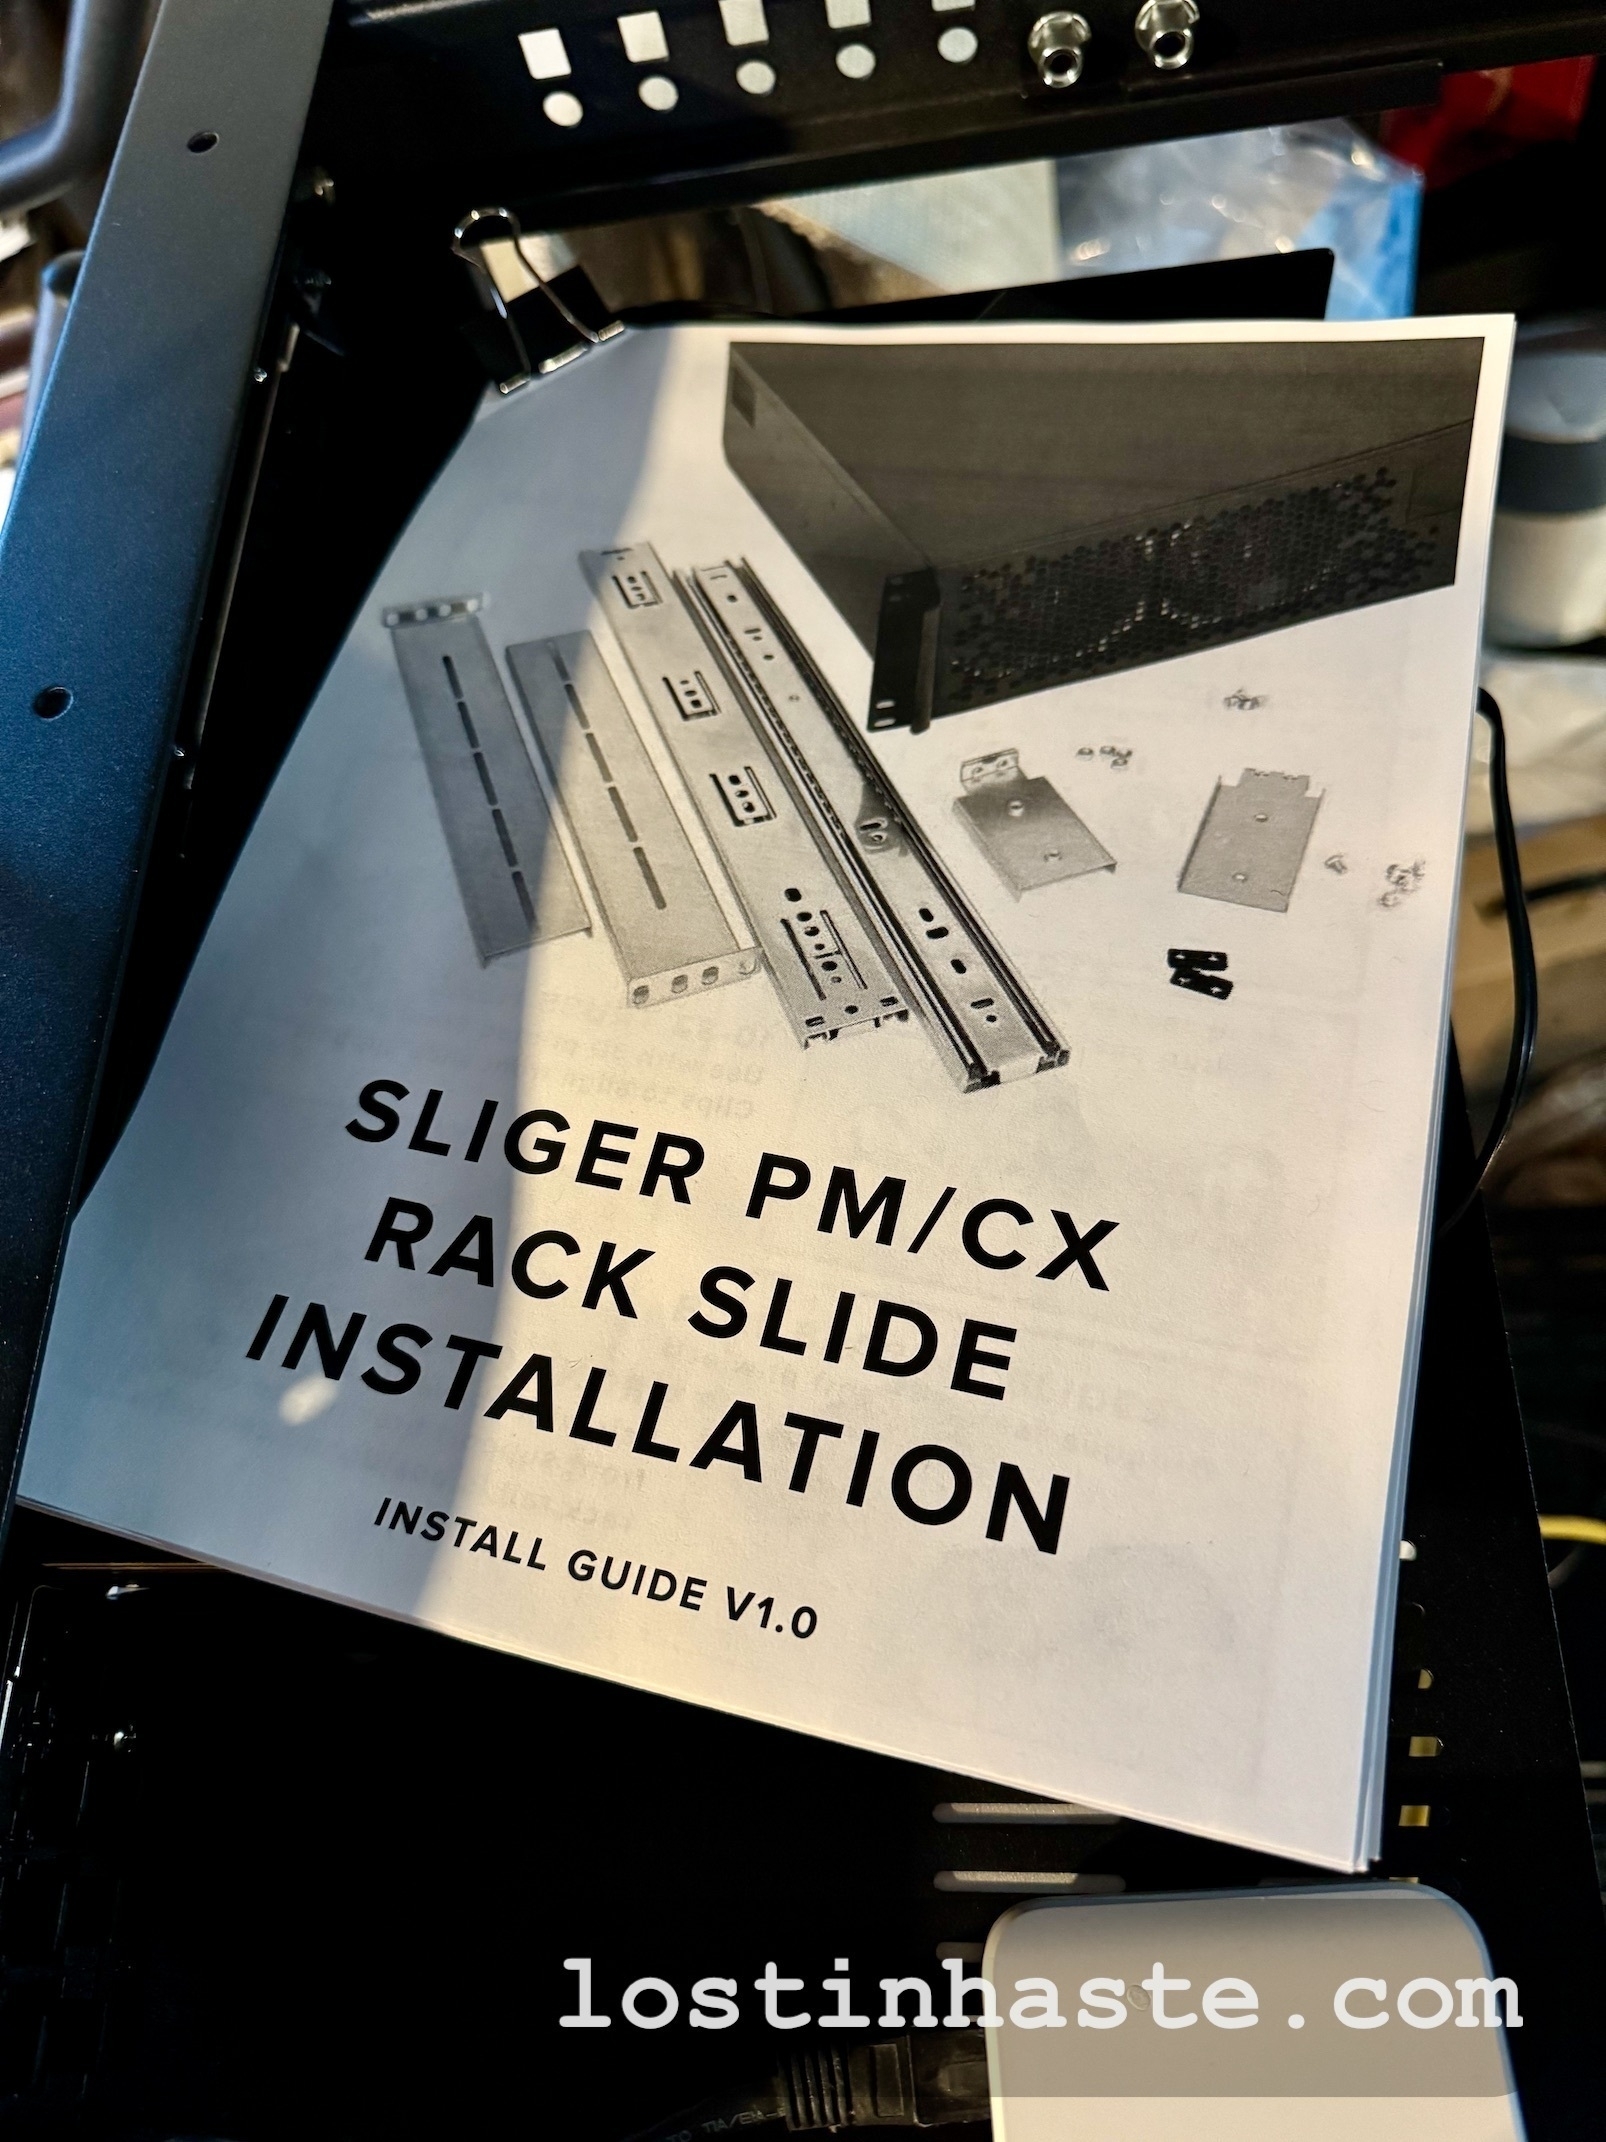 A manual titled 'SLIGER PM/CX RACK SLIDE INSTALLATION INSTALL GUIDE V1.0' rests on hardware parts, with the URL 'lostinthe.com' visible at the bottom.